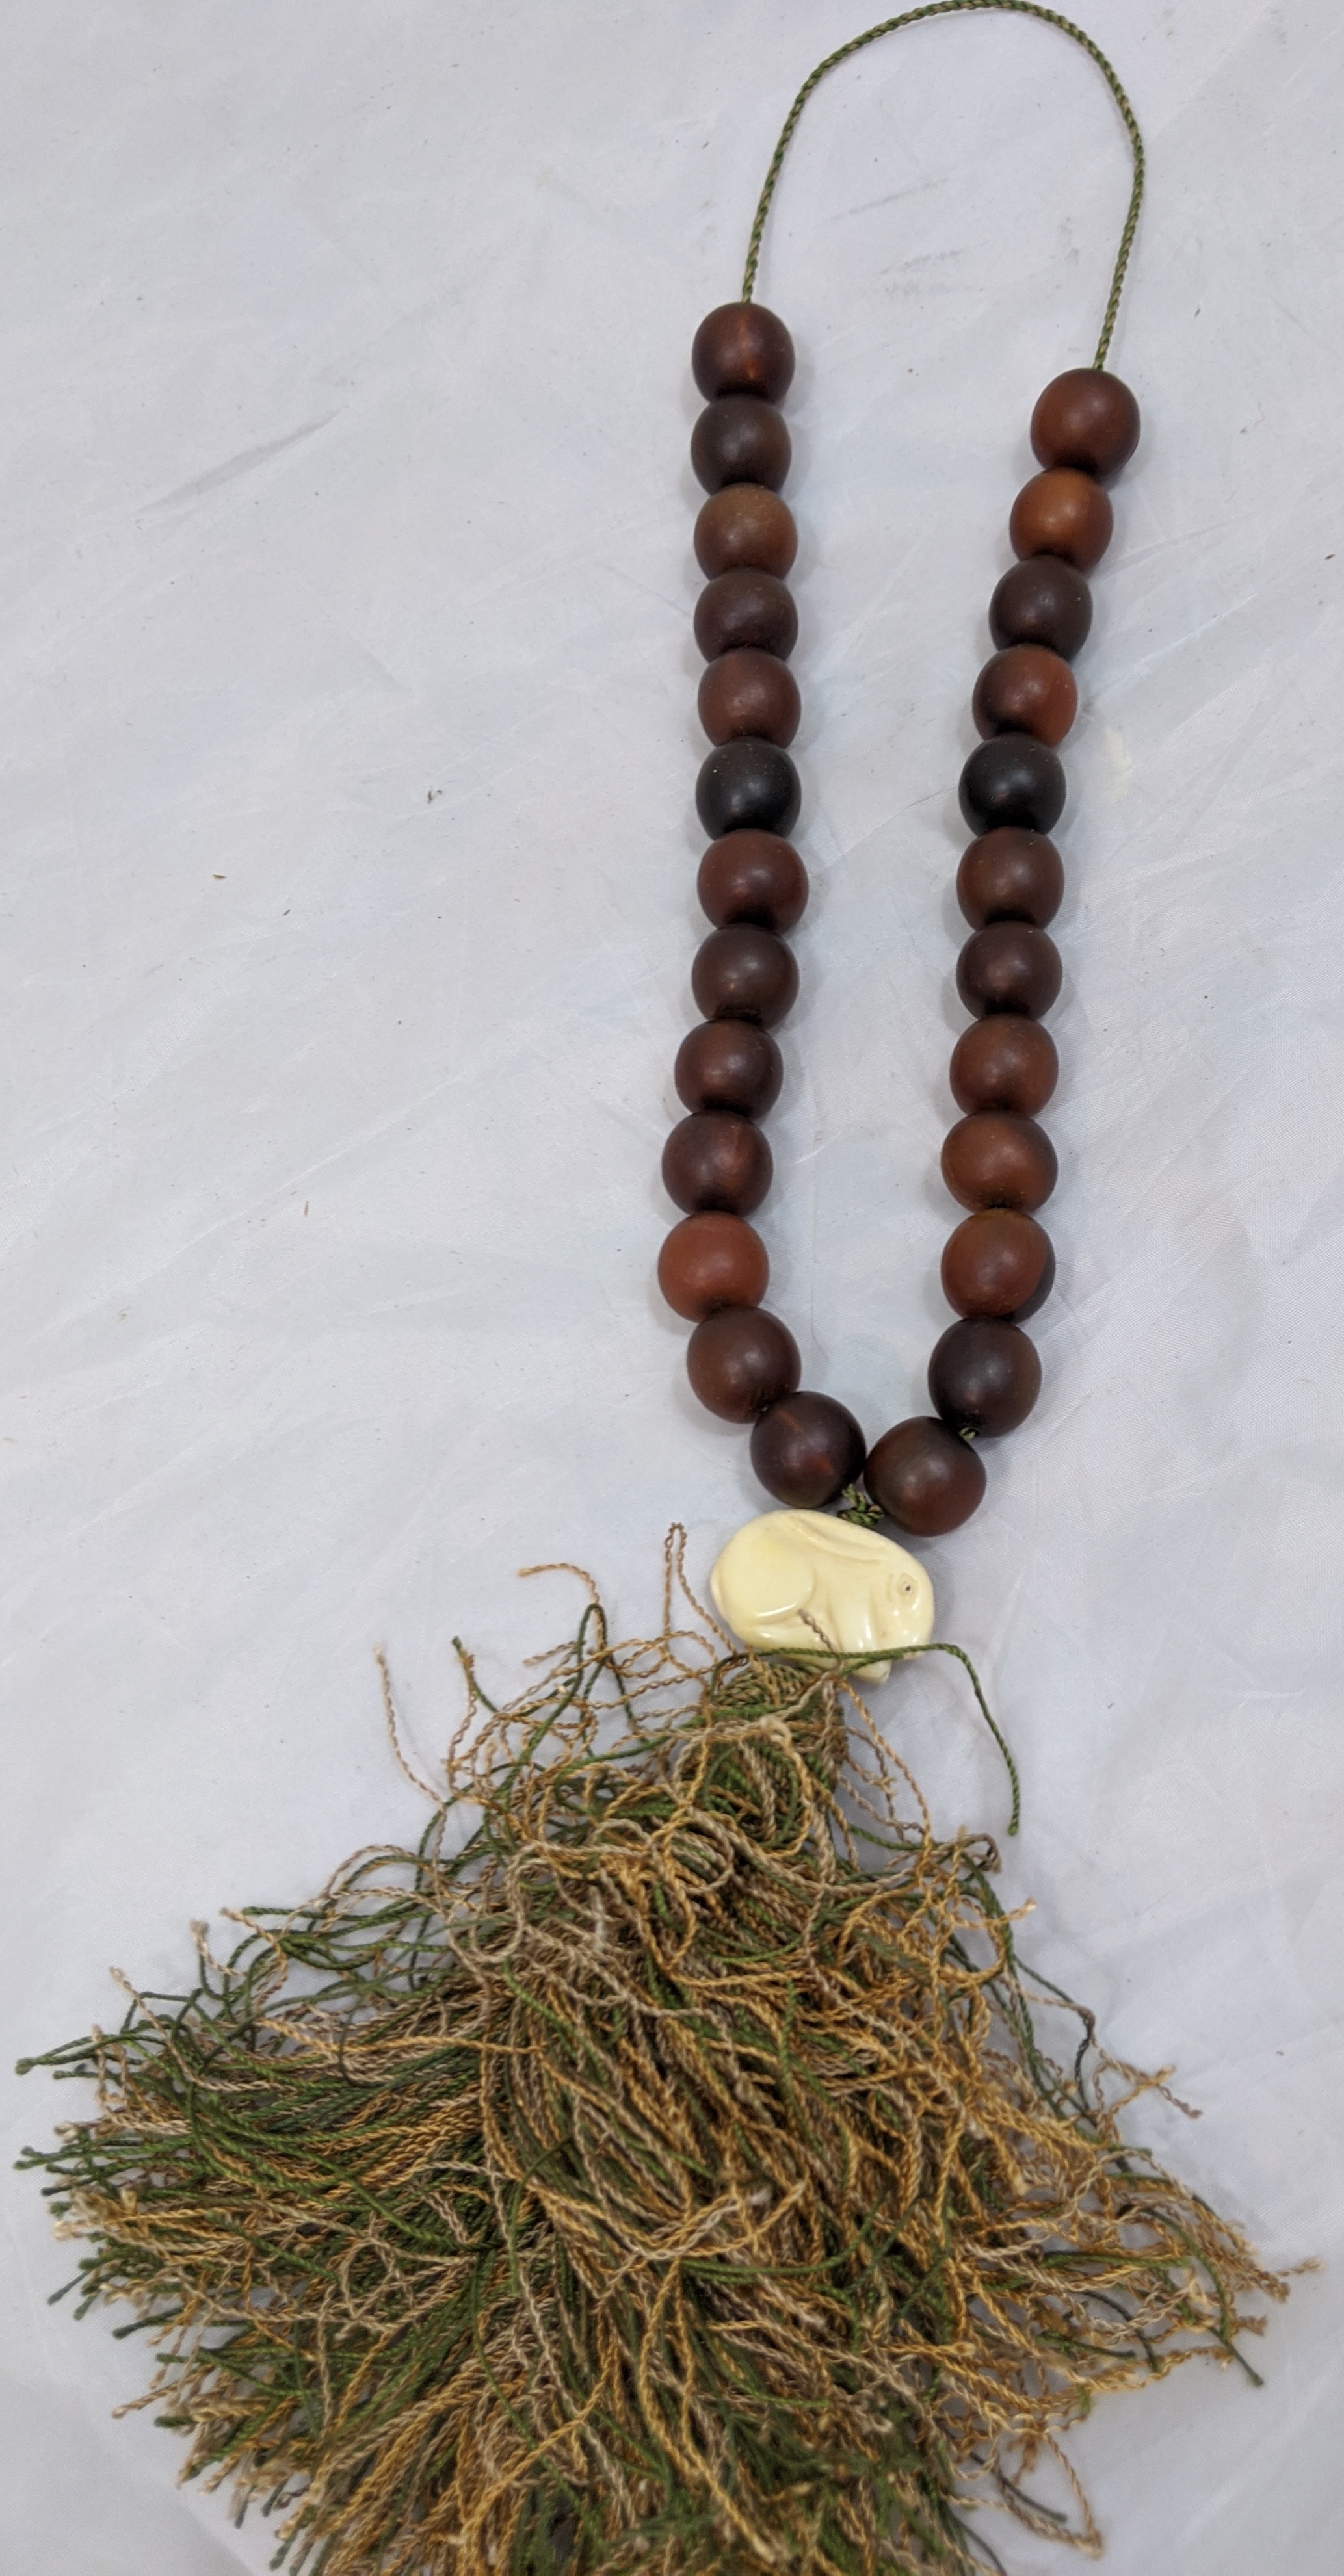 19th century Chinese rhinoceros horn prayer beads, mounted with a carved ivory rabbit and tassel, 25